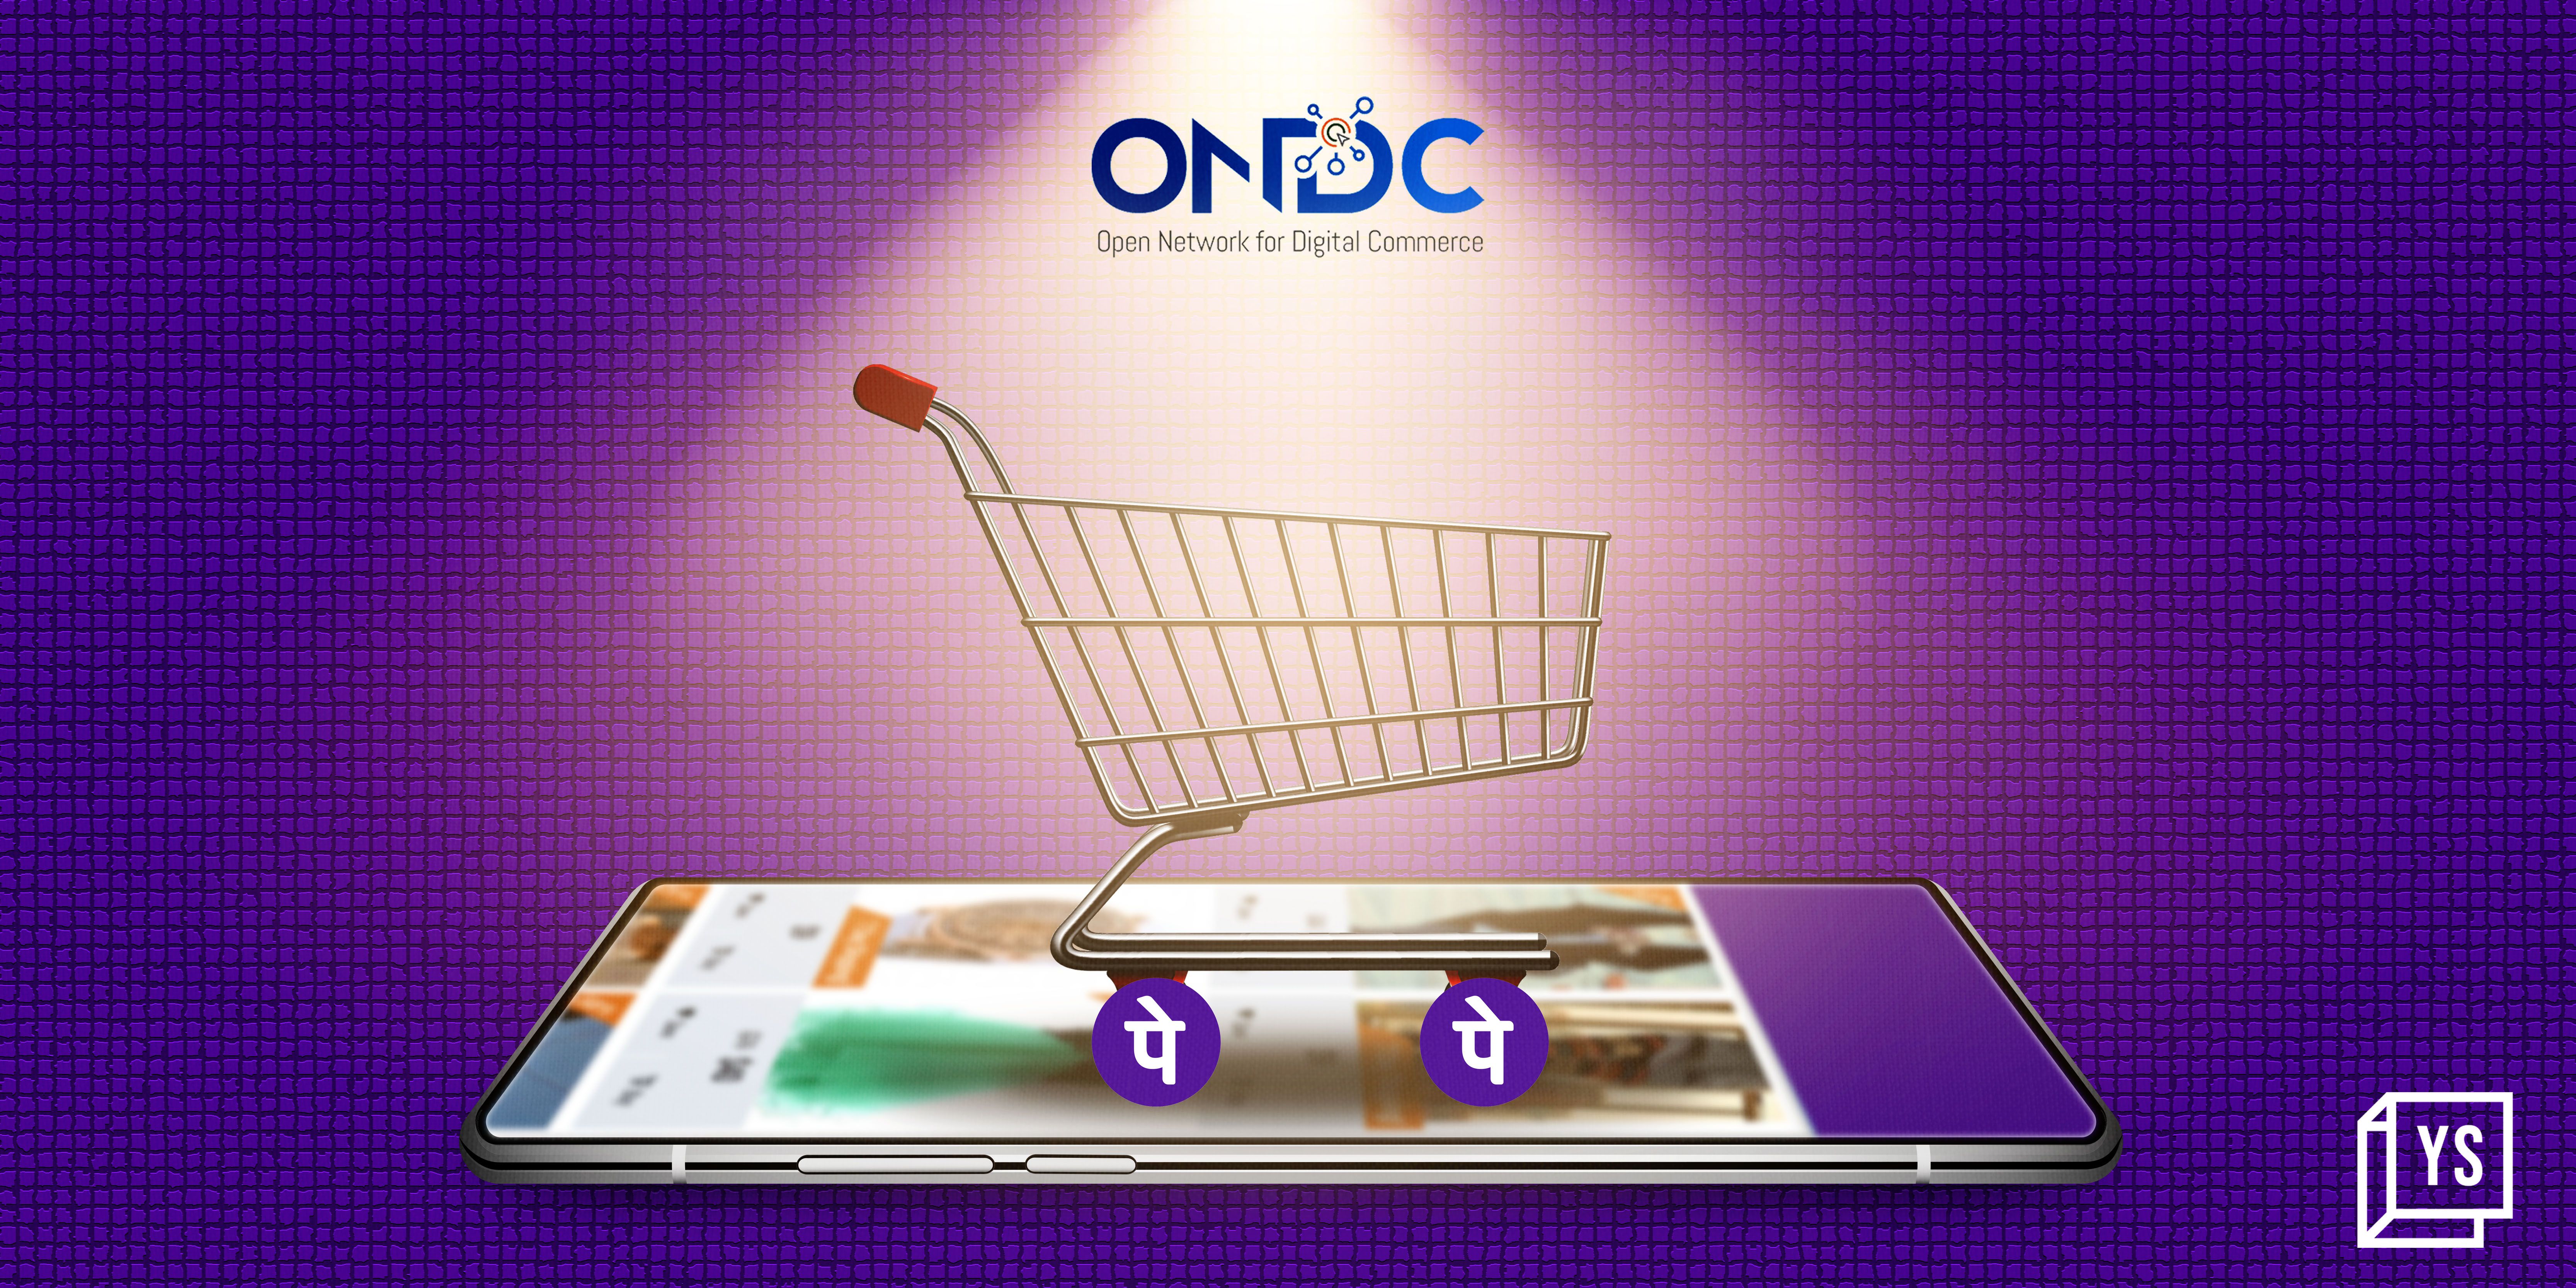 Government wants all ecommerce players to become part of ONDC: DPIIT Secretary